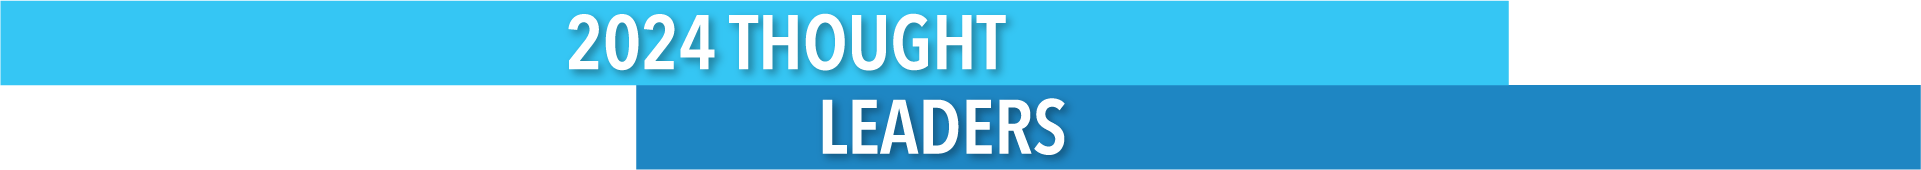 Event Thought Leaders